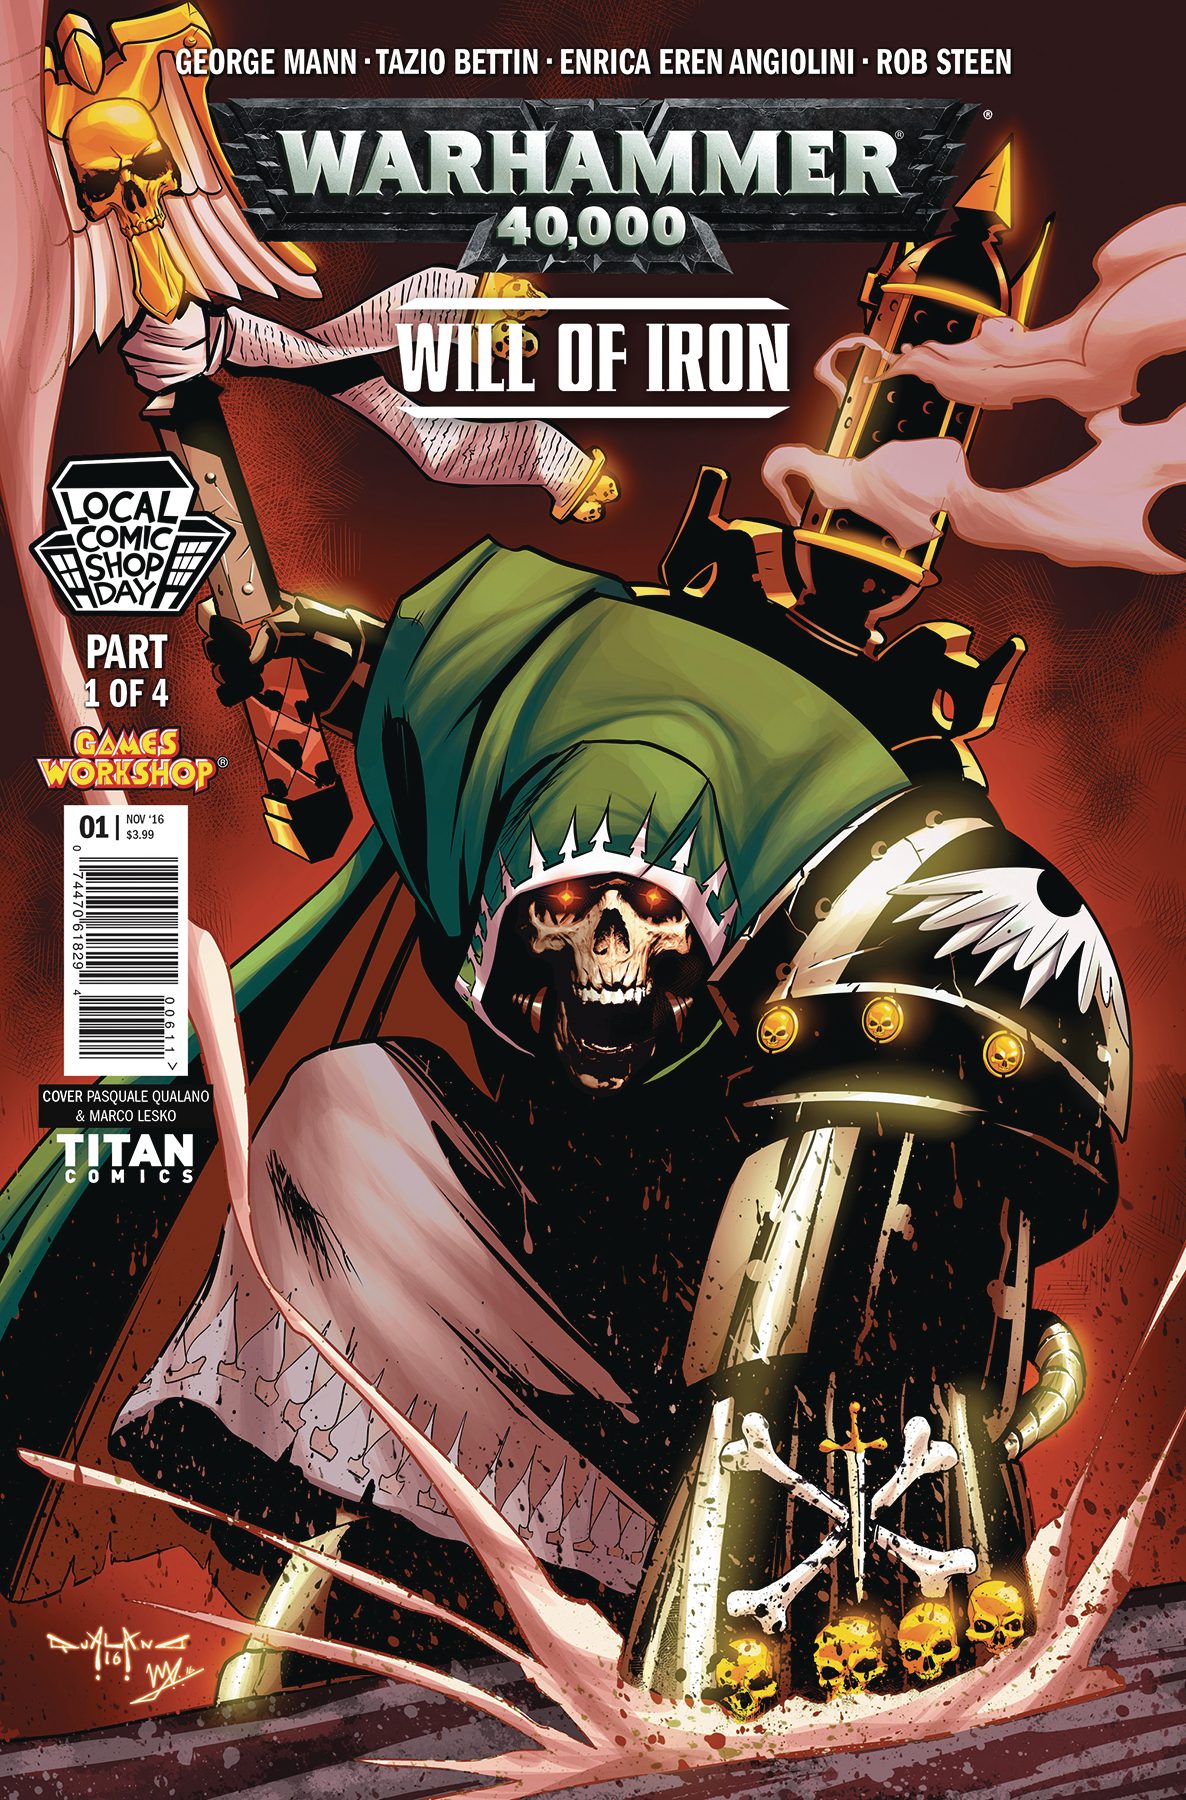 LCSD 2016 WARHAMMER 40000 WILL OF IRON #1 (OF 4)